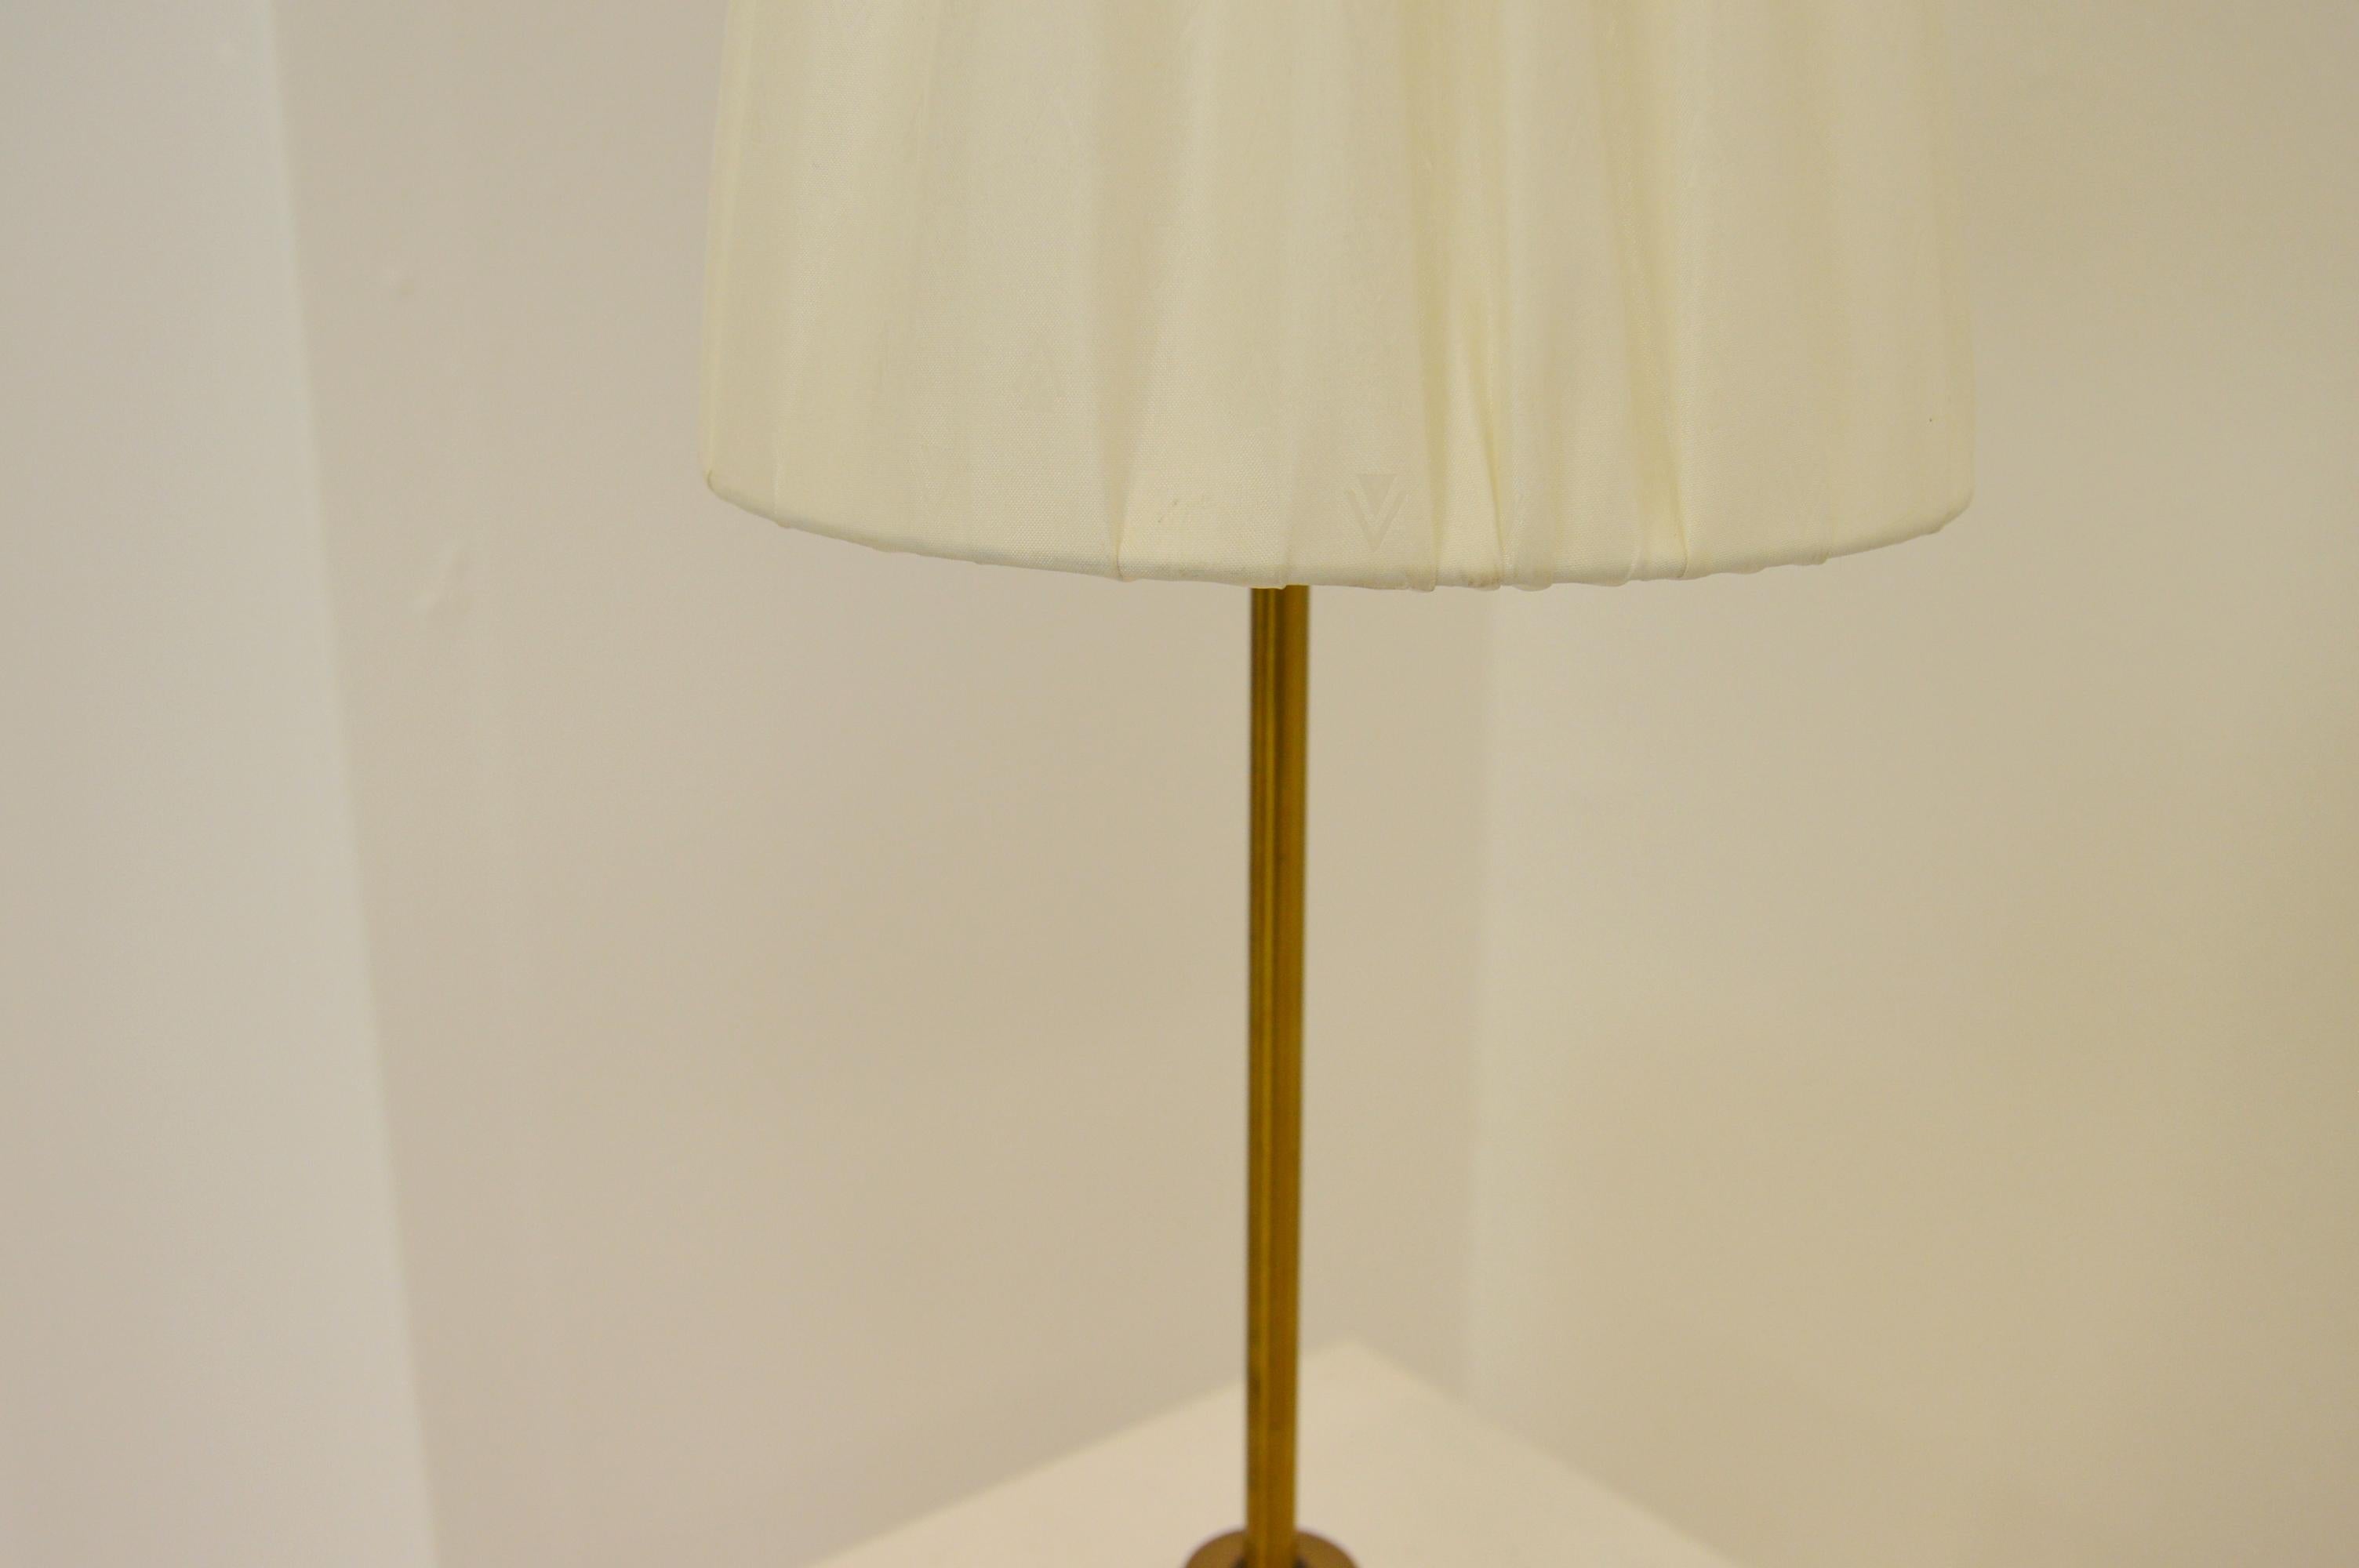 Swedish Midcentury Brass Table Lamp In Good Condition For Sale In Alvesta, SE